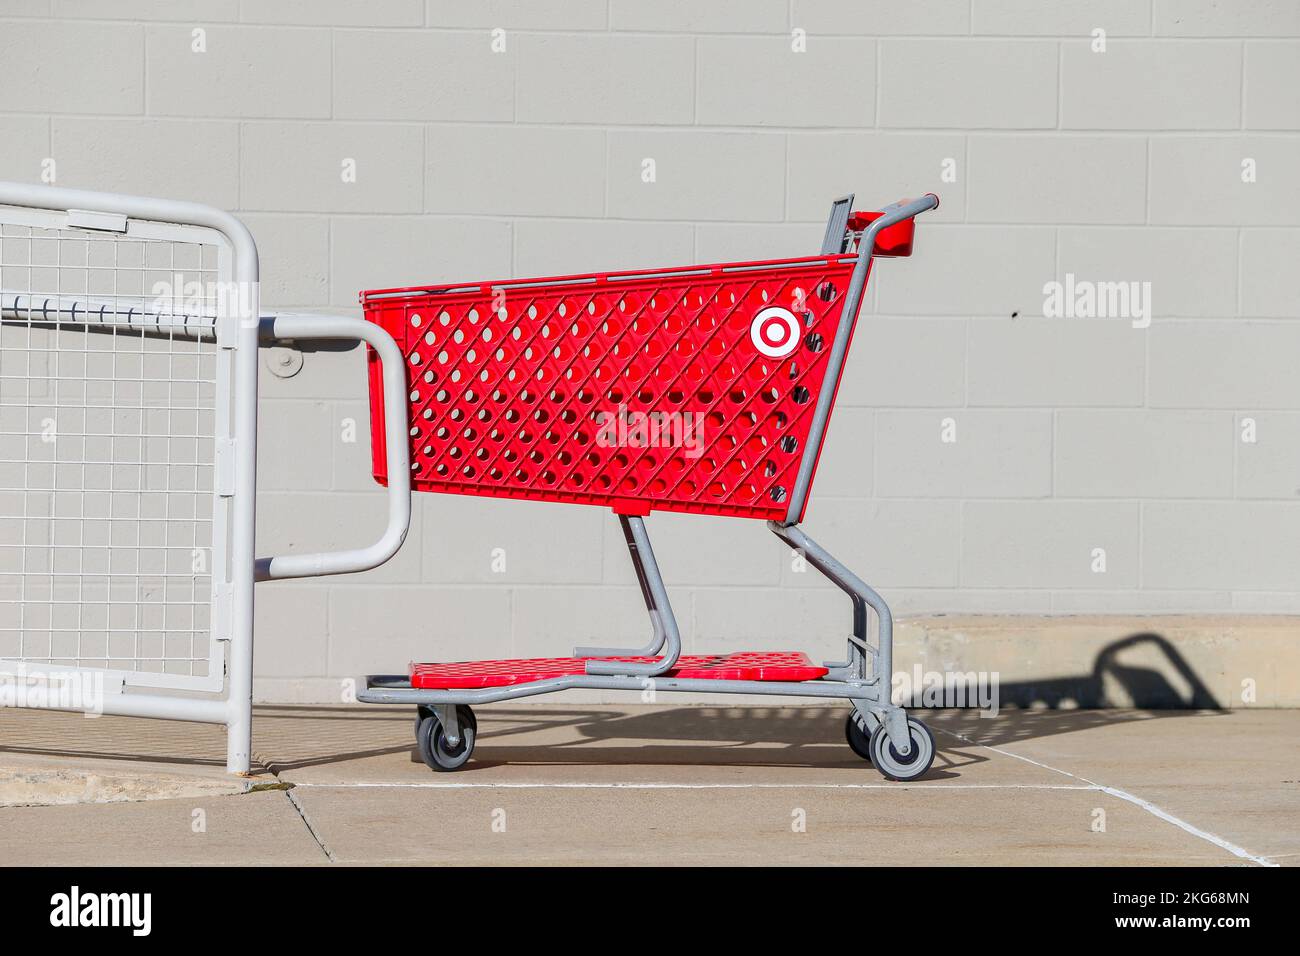 Muncy, United States. 21st Nov, 2022. A shopping cart is seen outside of a Target store in Muncy, Pennsylvania, on Monday, November 21, 2022. The Christmas holiday shopping season in the United States traditionally starts after Thanksgiving. (Photo by Paul Weaver/Sipa USA) Credit: Sipa USA/Alamy Live News Stock Photo